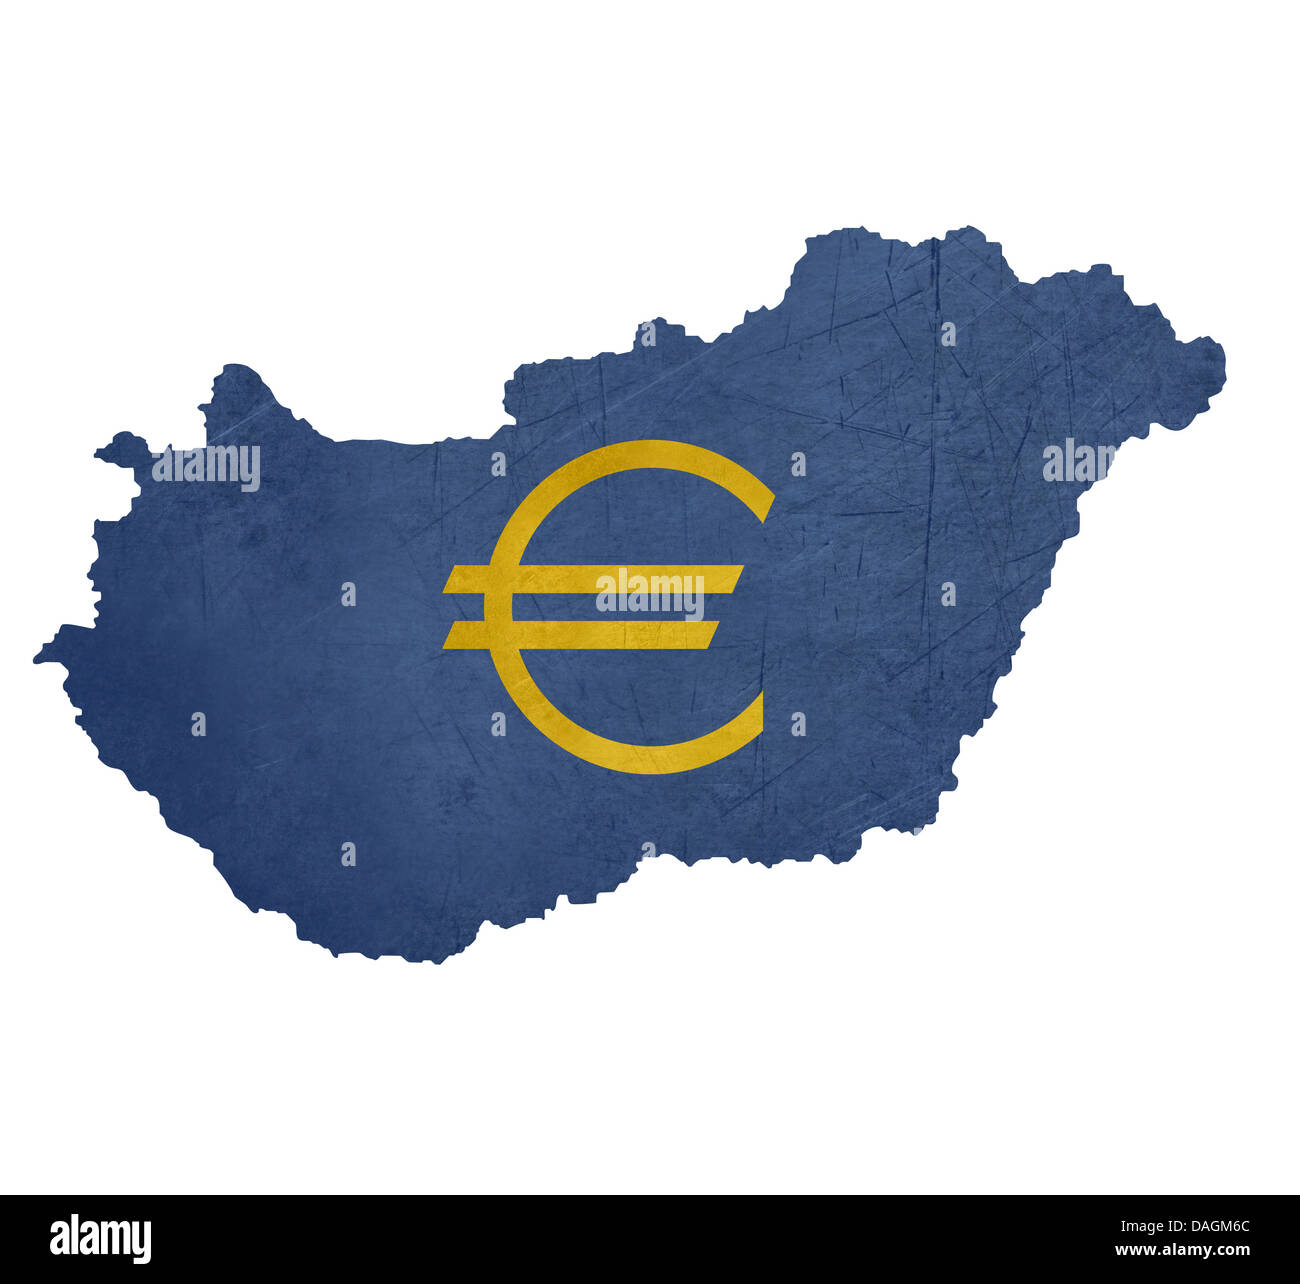 European currency symbol on map of Hungary isolated on white background. Stock Photo